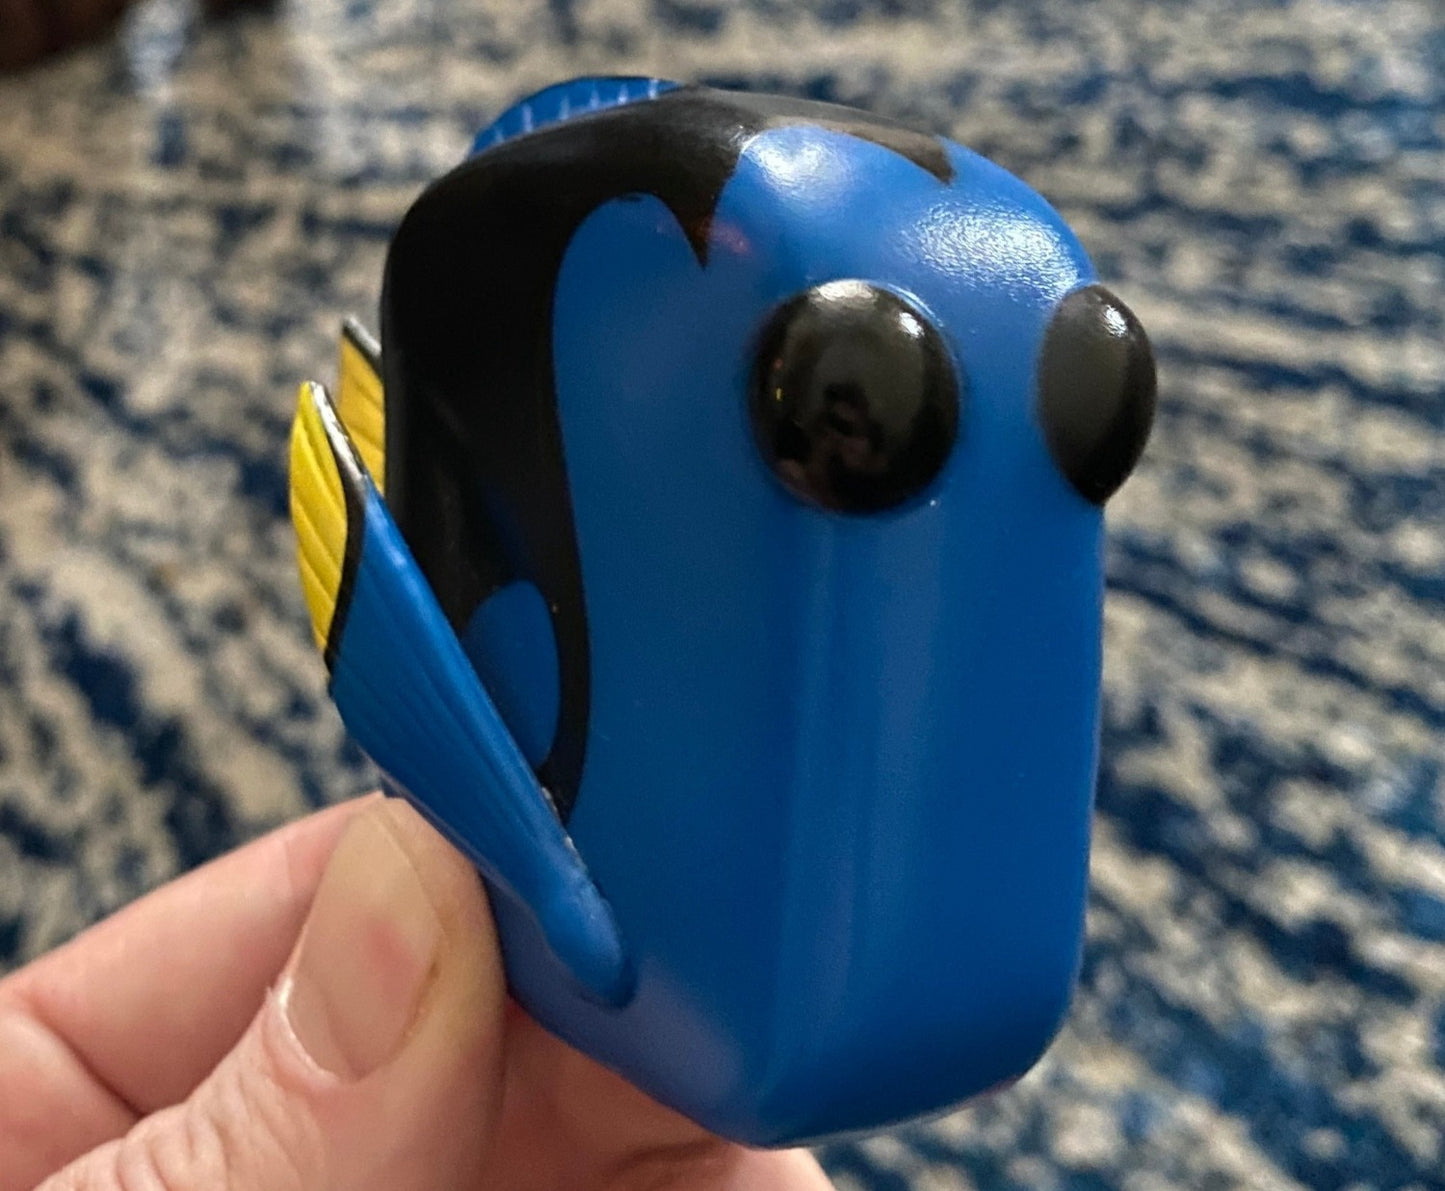 Original Dory toy that I started with